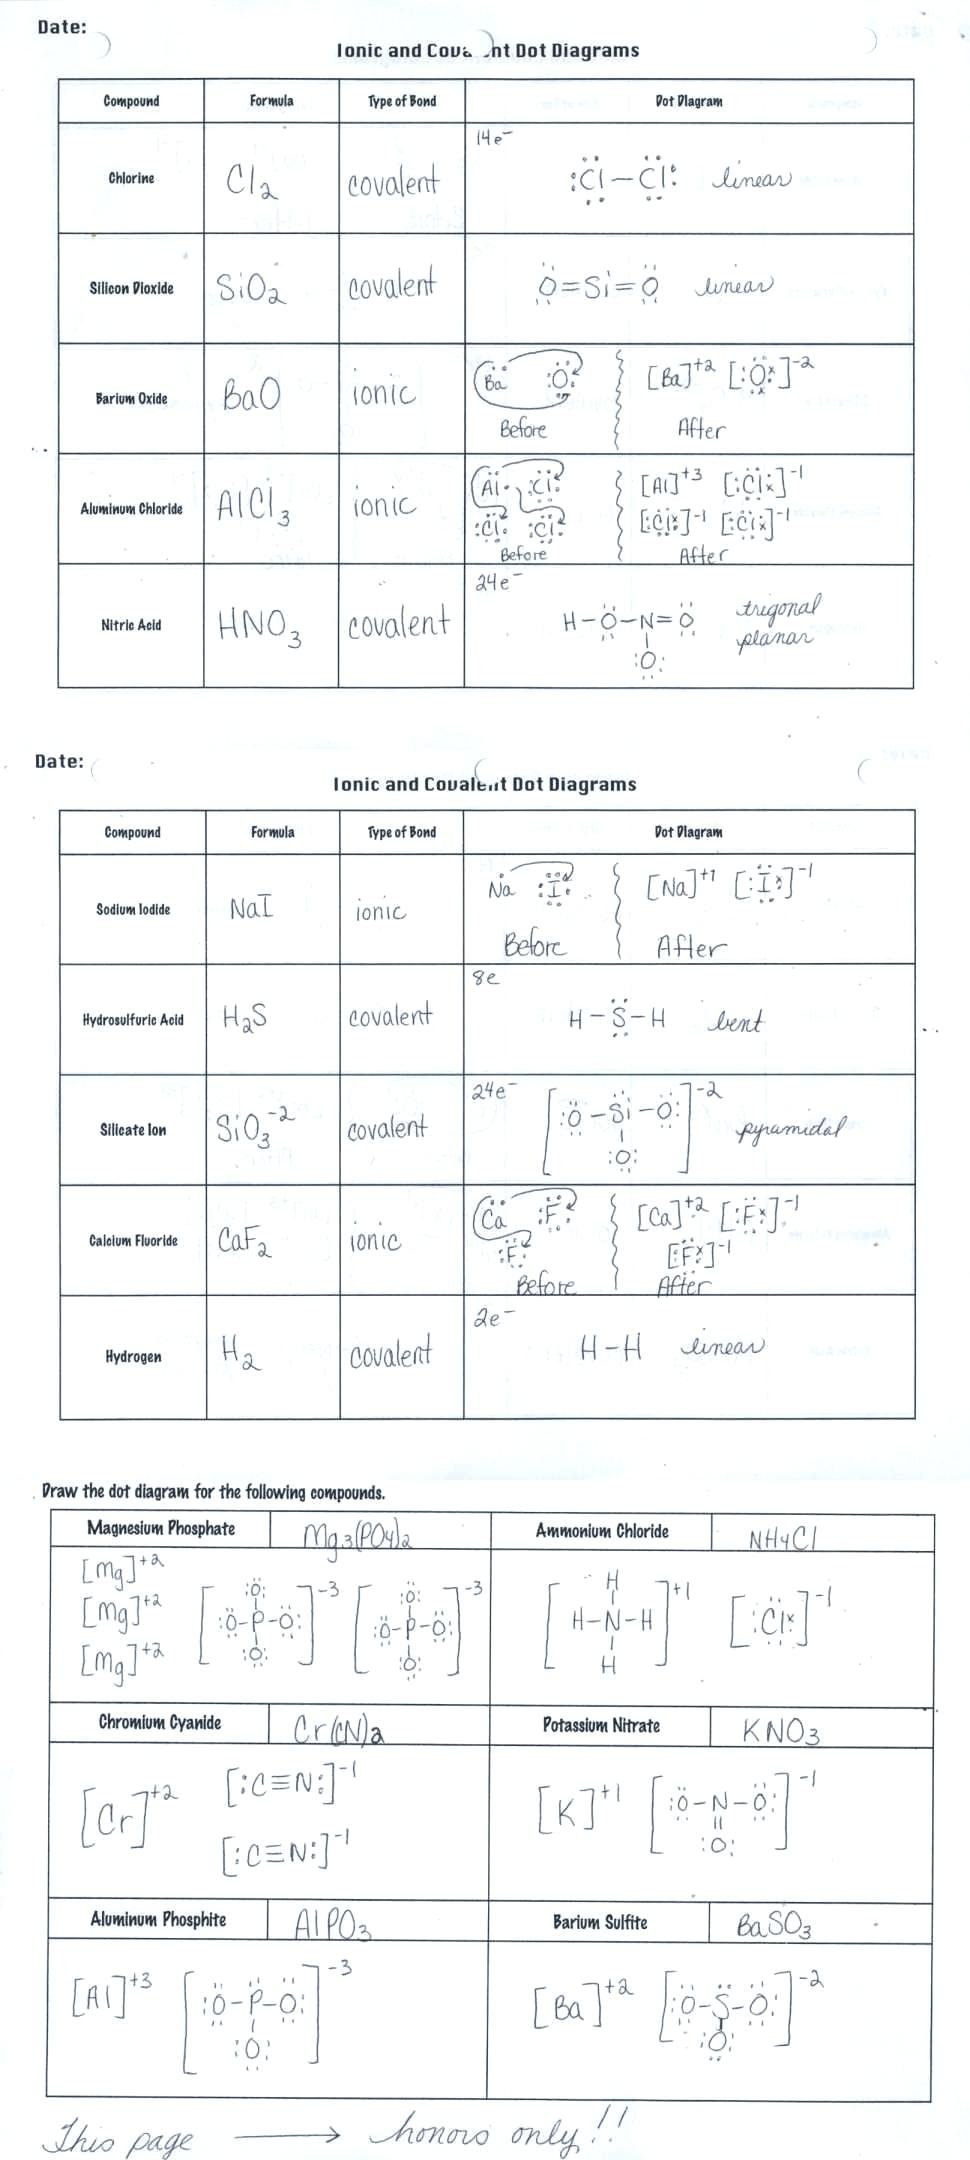 Chemical Bonds Ionic Bonds Worksheet Image Result For Ionic Intended For Types Of Chemical Bonds Worksheet Answers